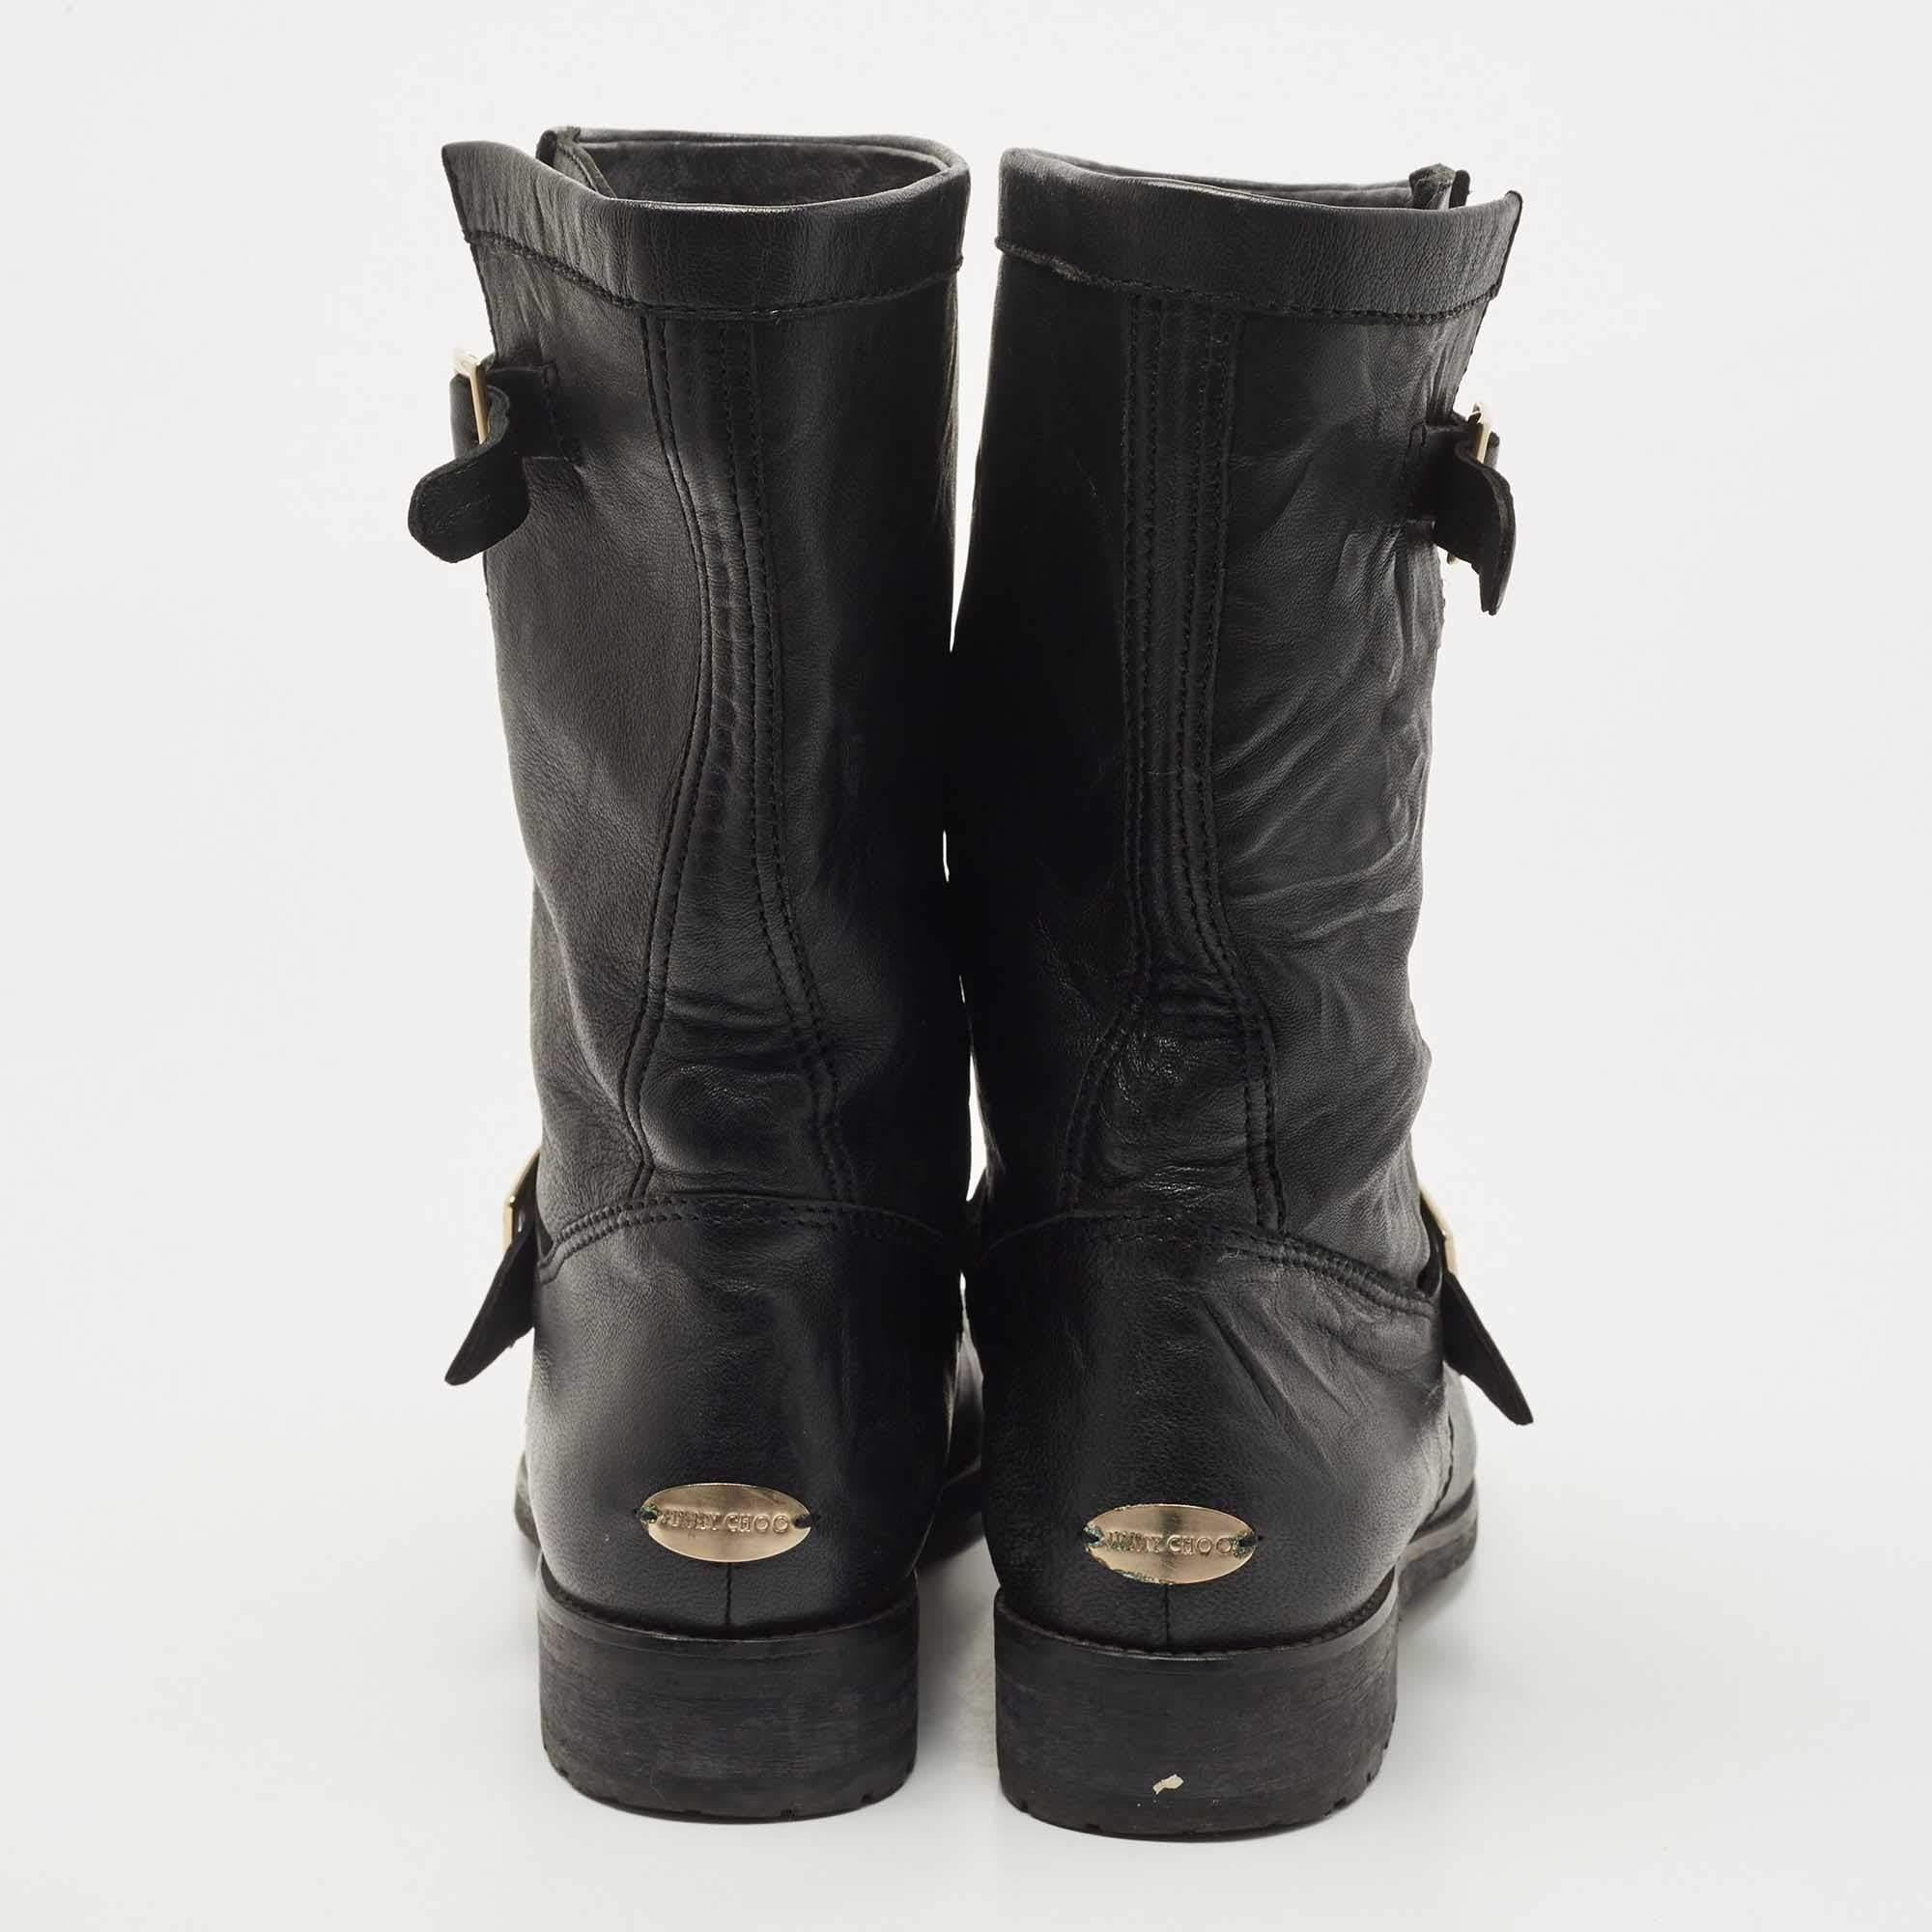 Jimmy Choo Black Leather Midcalf Boots Size 37.5 1